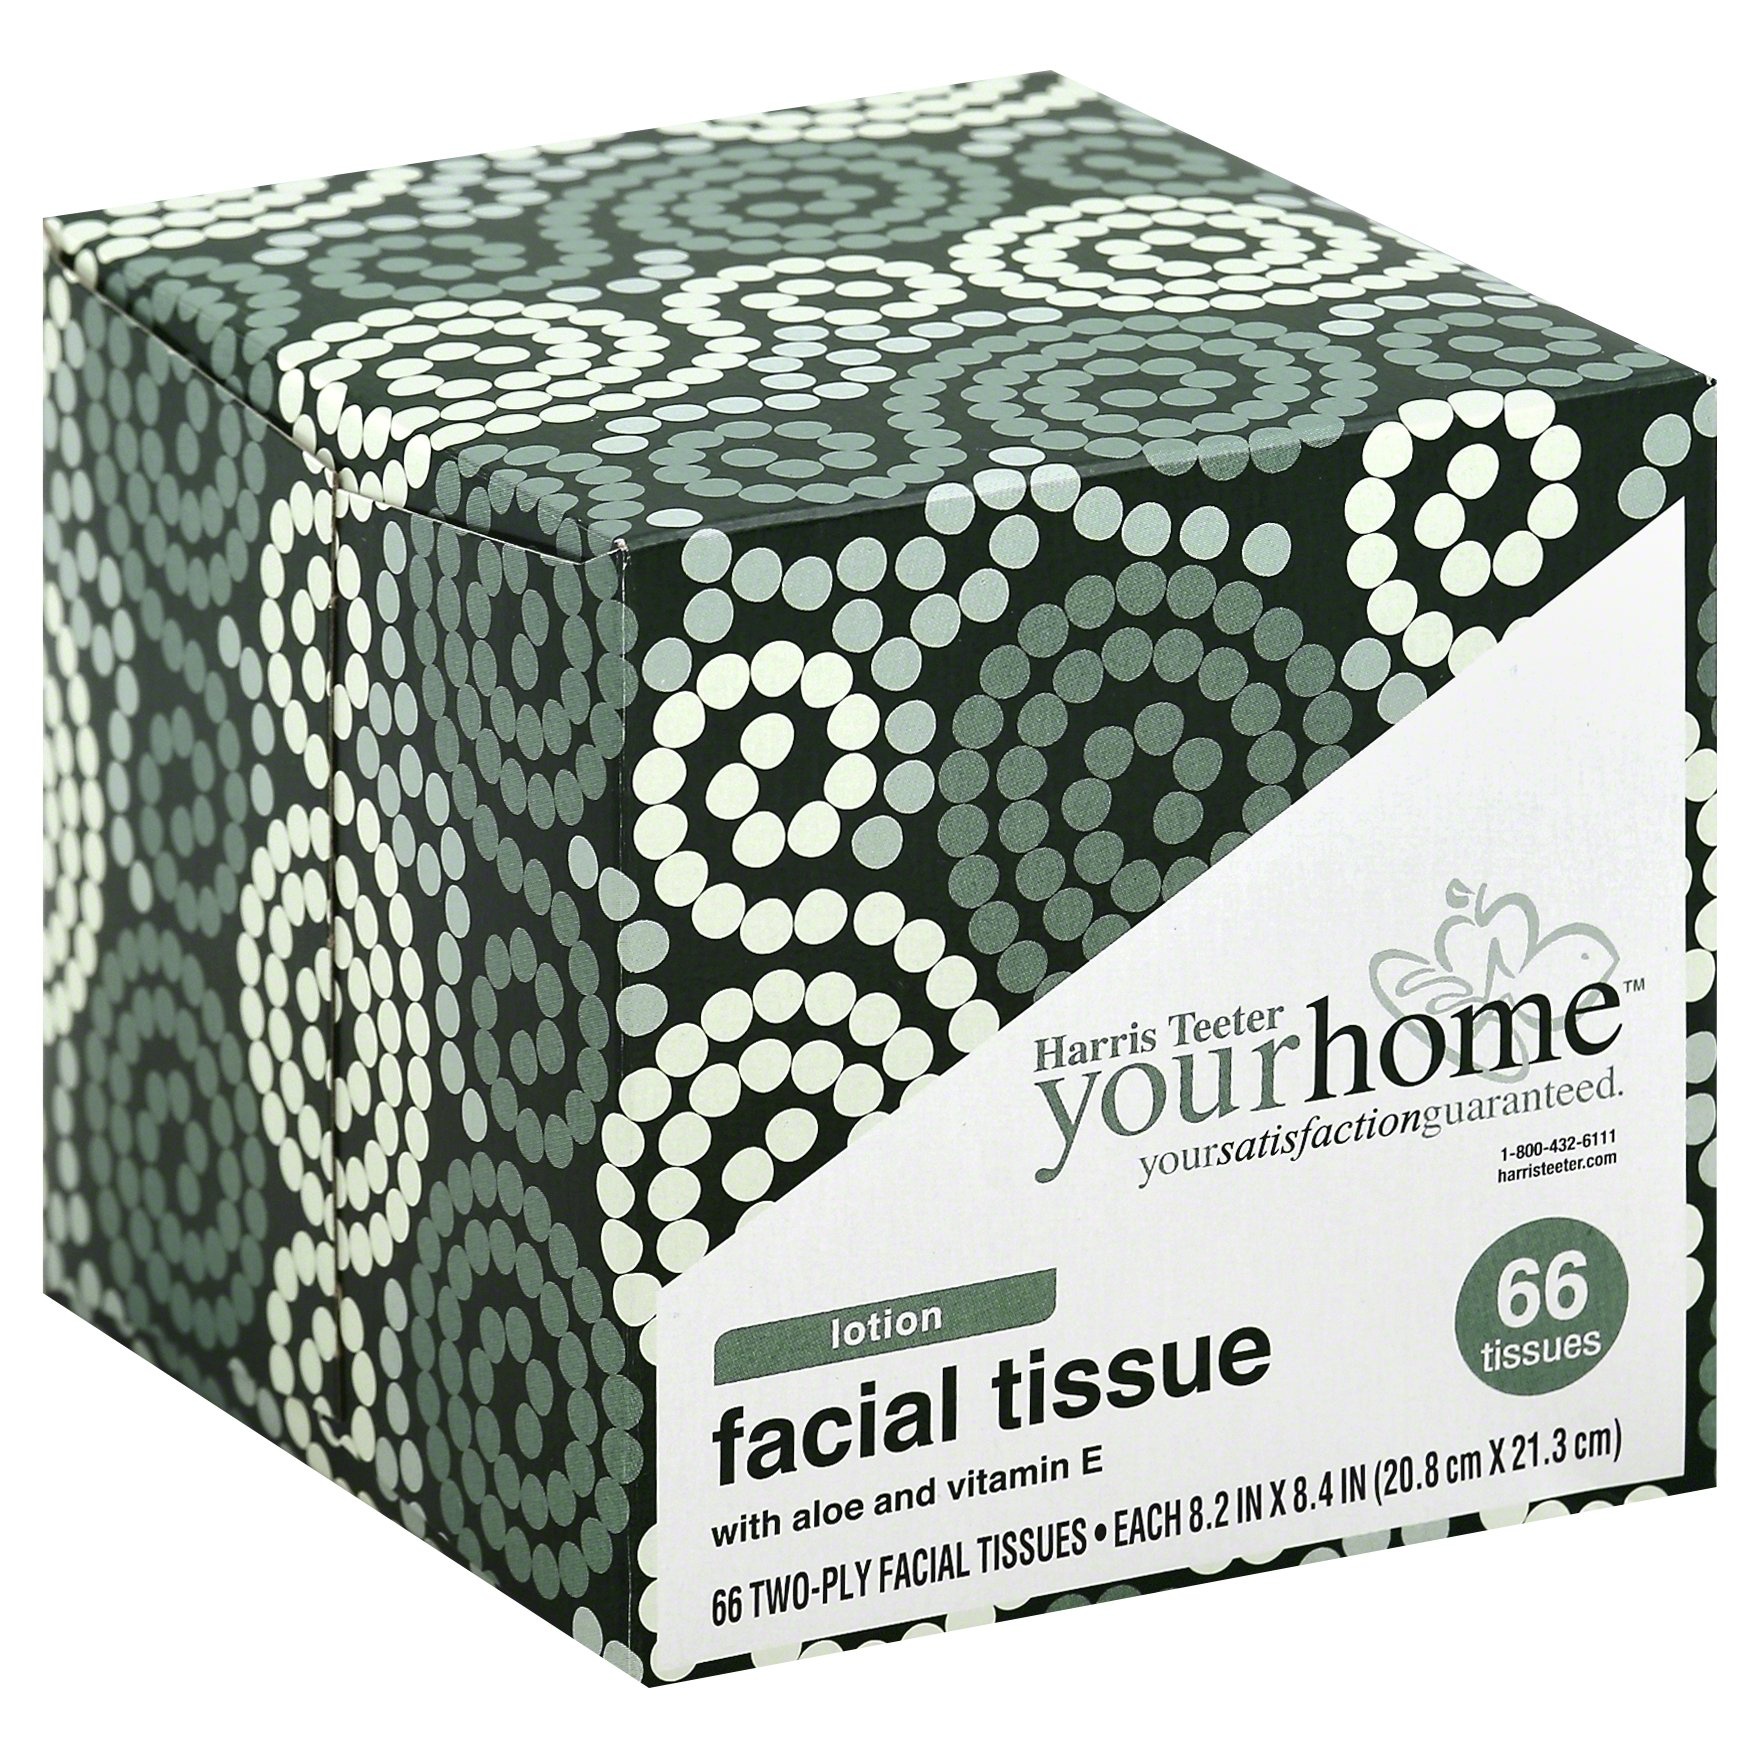 slide 1 of 1, Harris Teeter yourhome Two-Ply Facial Tissue with Lotion, 66 ct